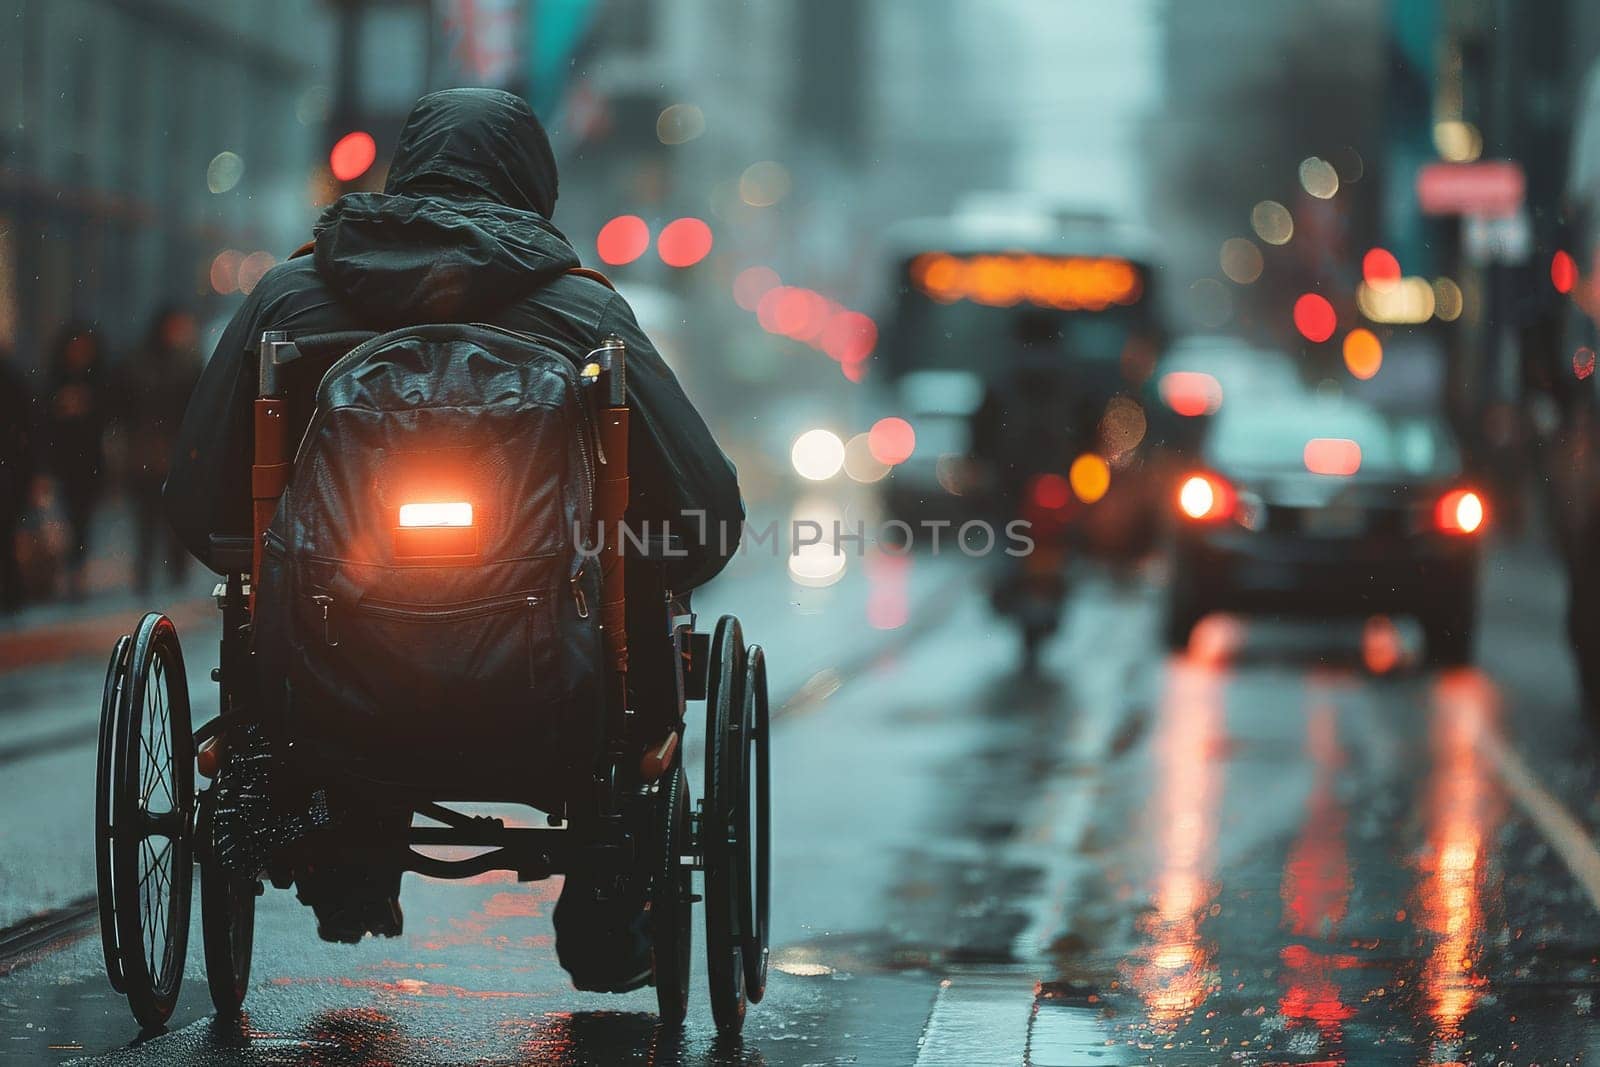 person in a wheelchair in a downtown area, The Difficulties of Real Life Wheelchairs.